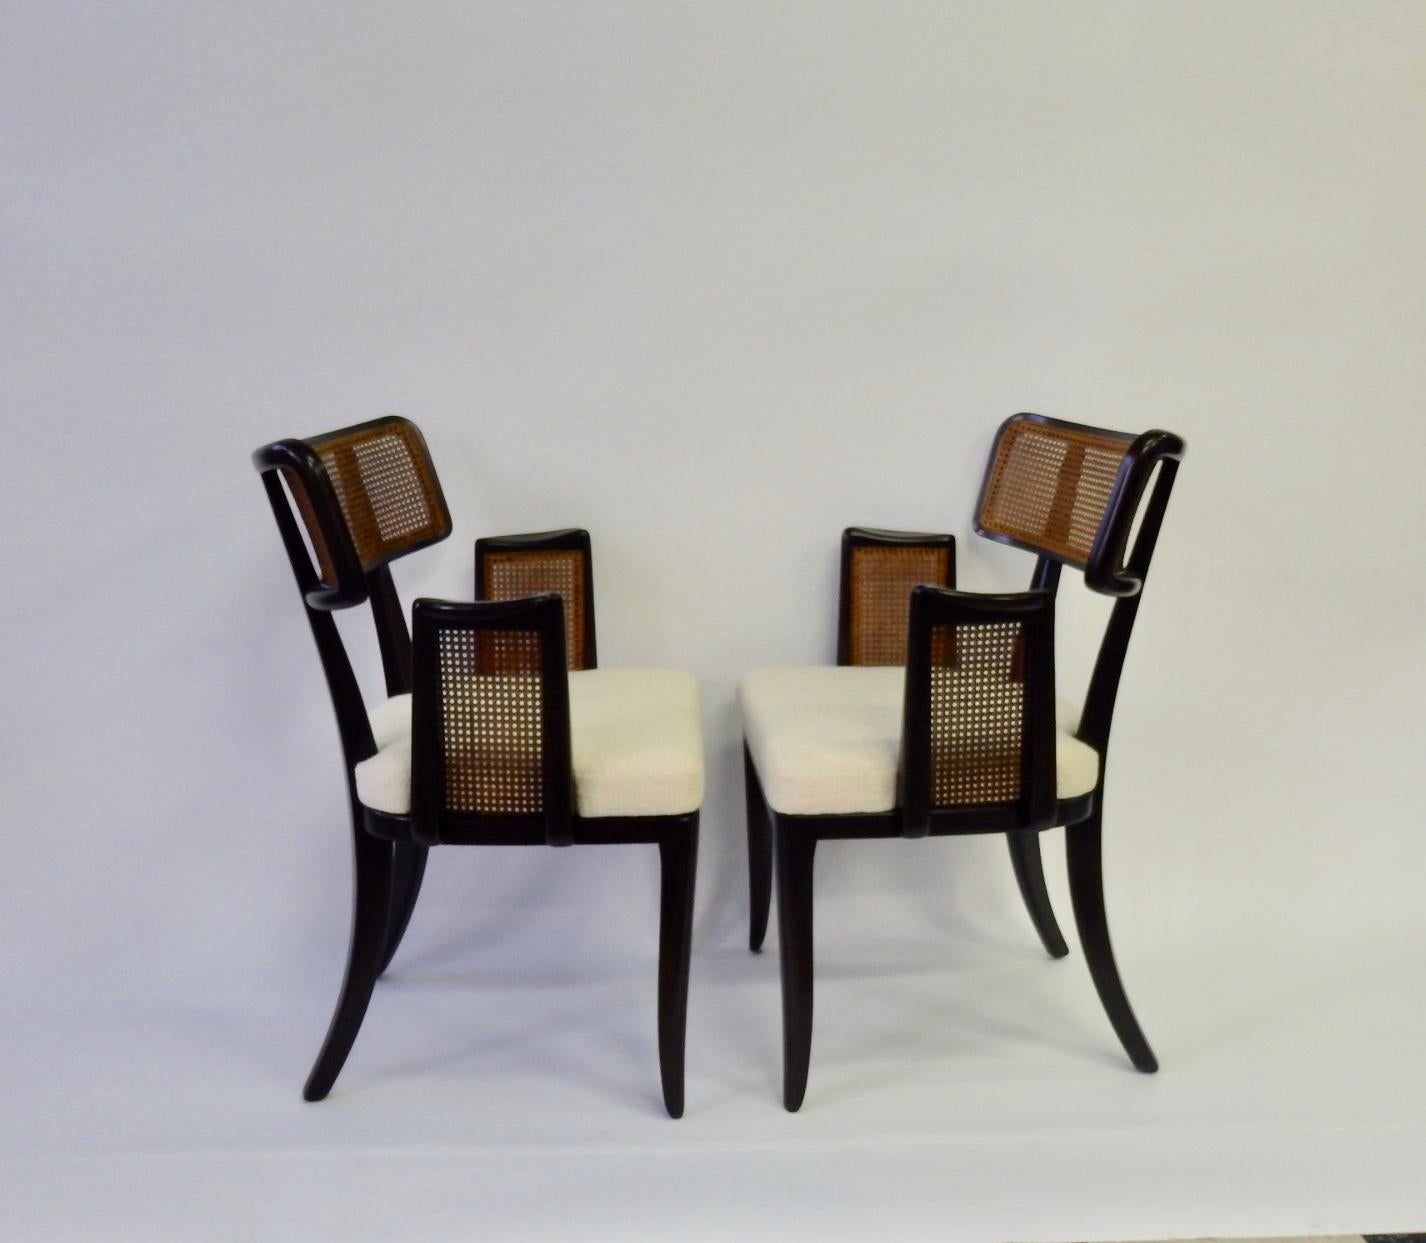 American Rare Pair of Edward Wormley for Dunbar Caneback Side Chairs